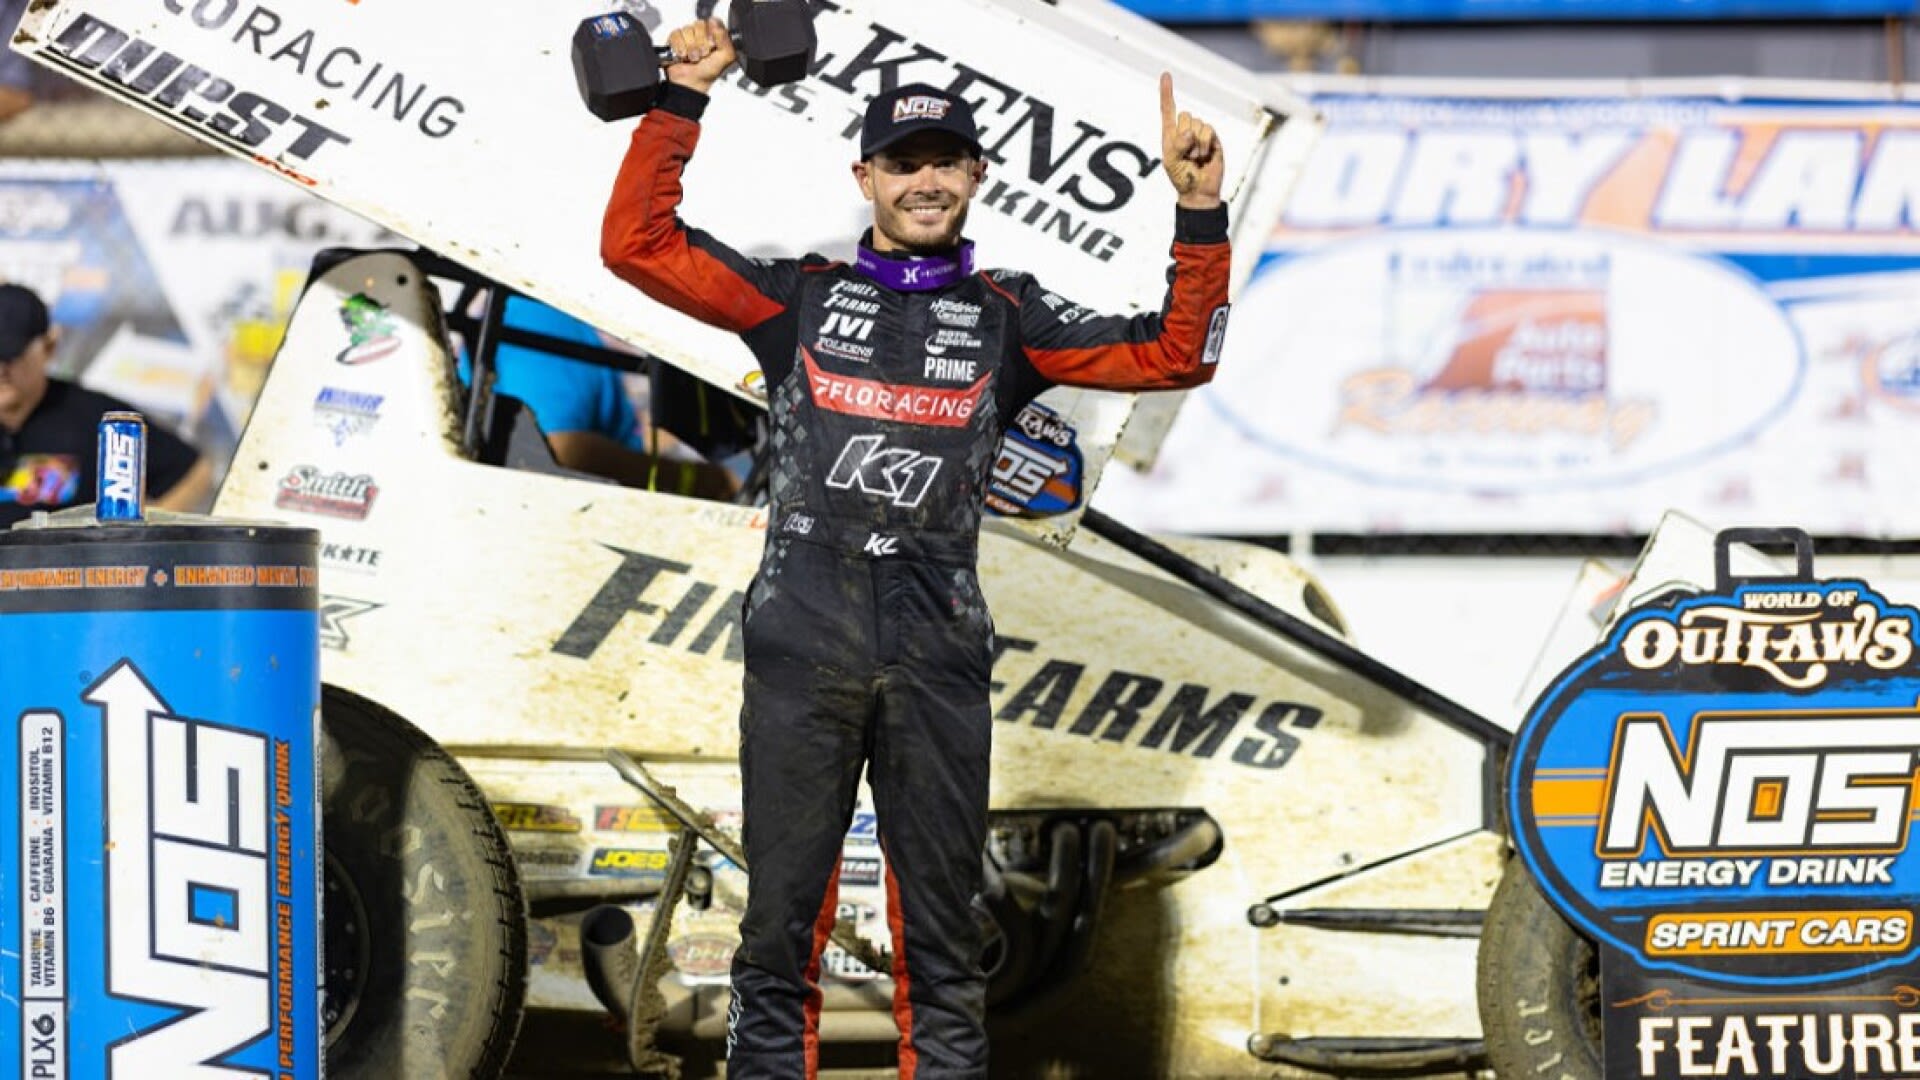 Weekend sweep gives Kyle Larson third World of Outlaws Ironman 55 victory